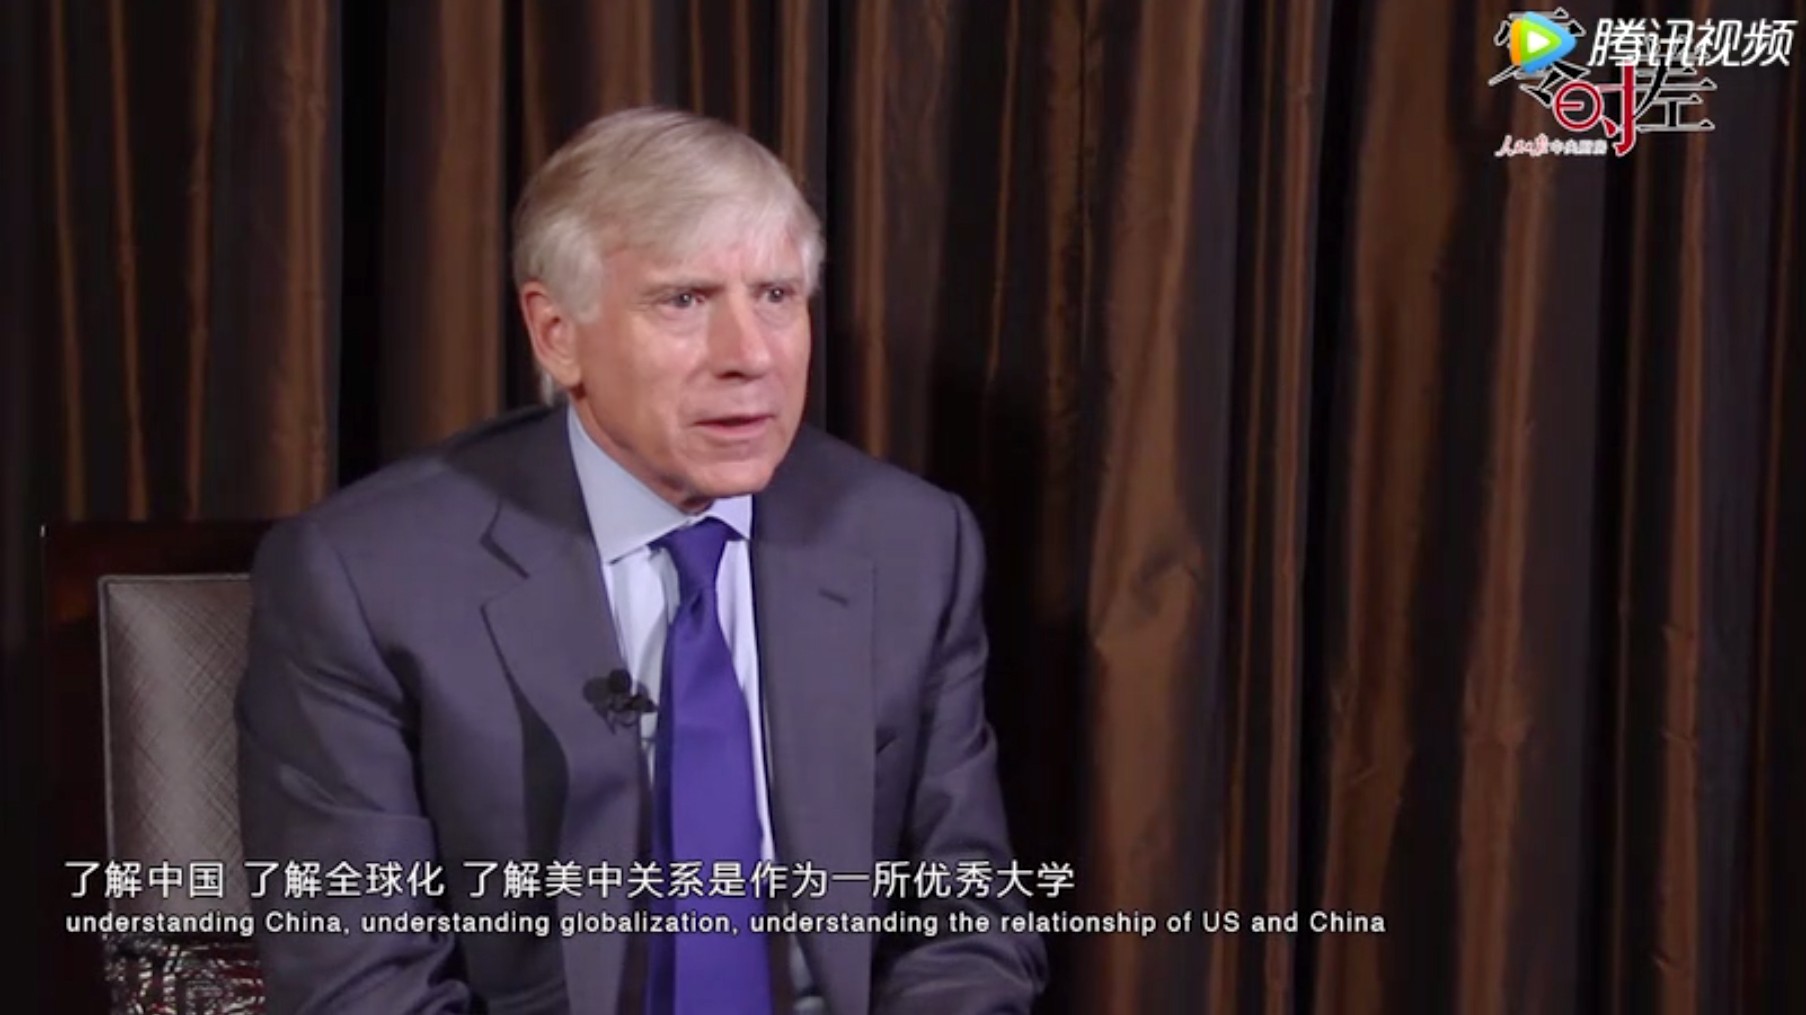 President Lee Bollinger's Interview with People's Daily